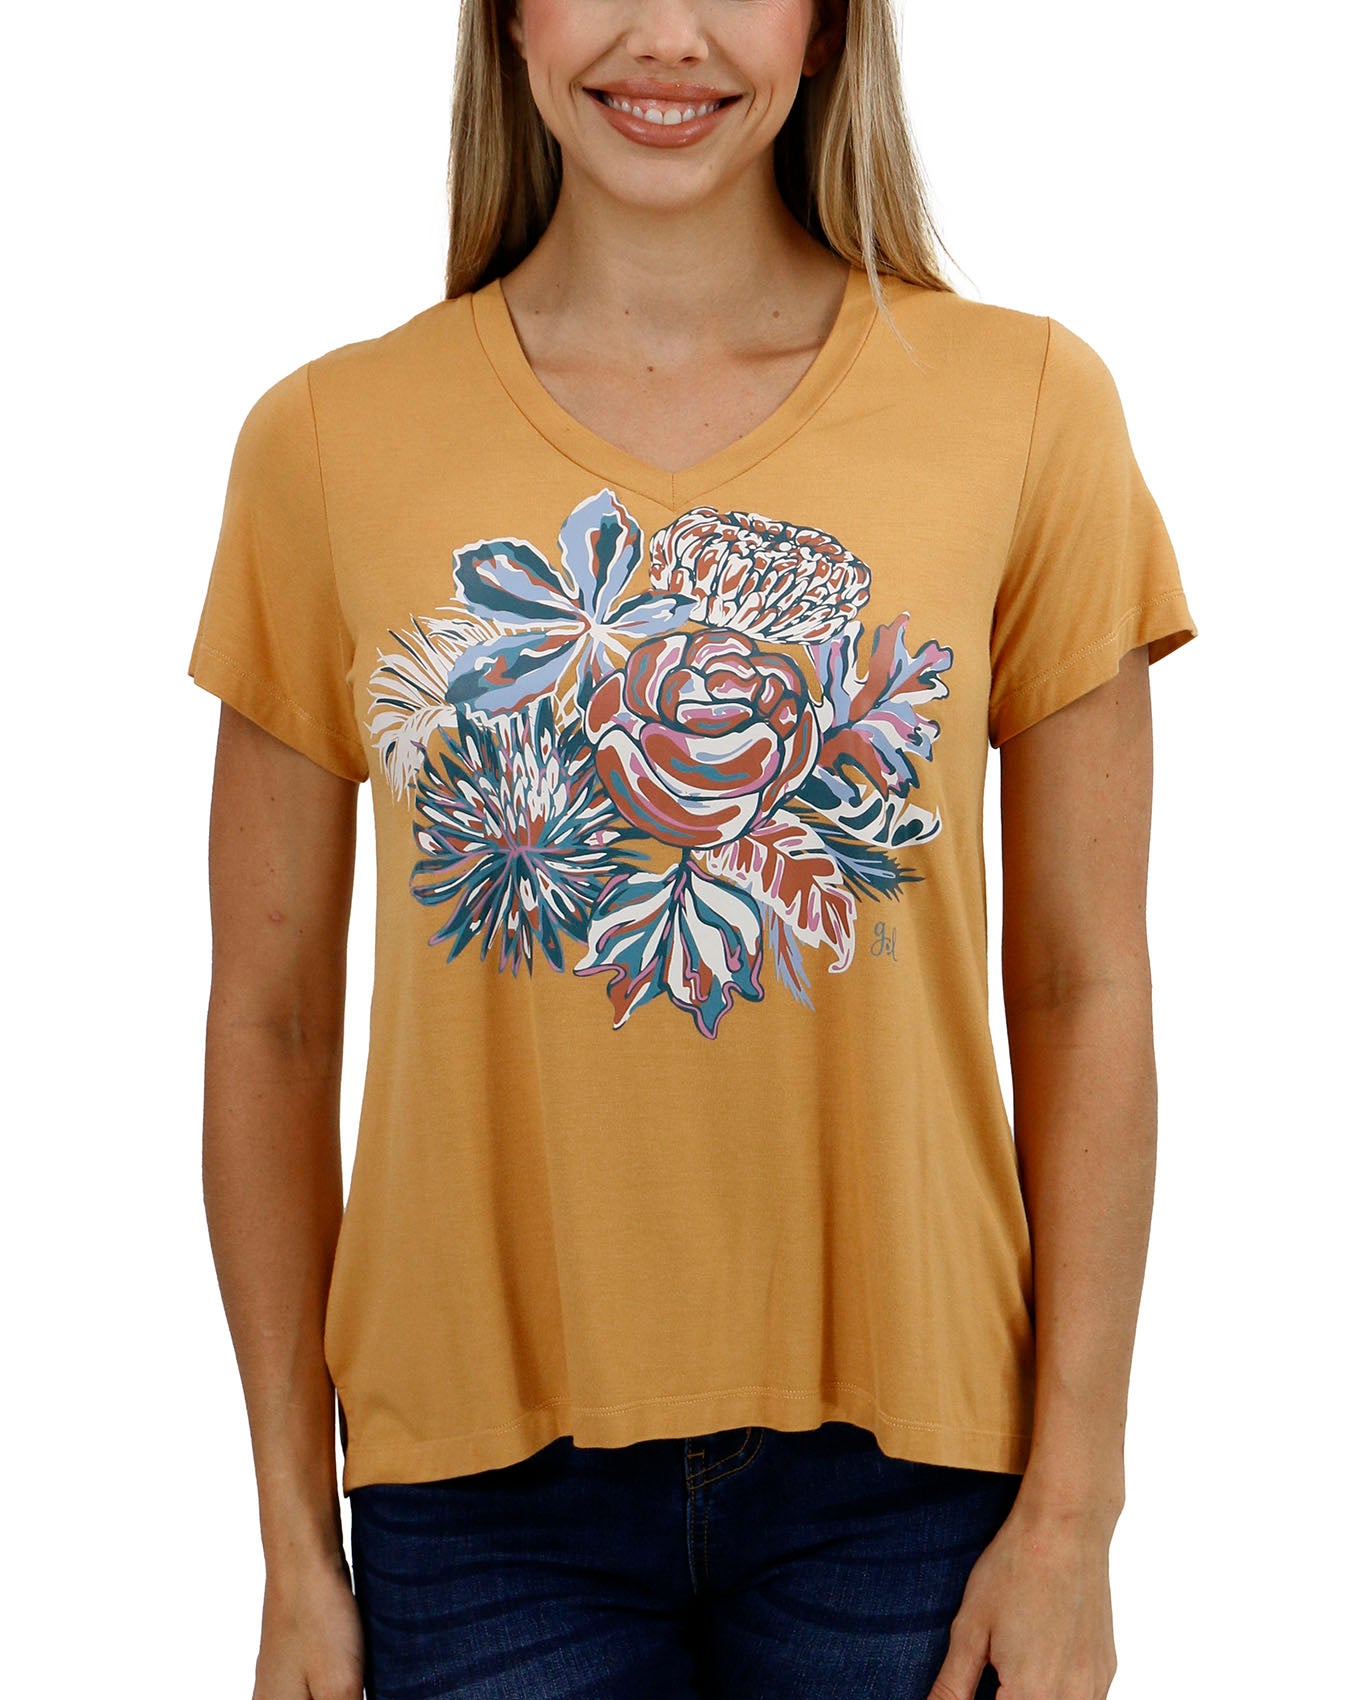 Sketched Floral Graphic Tee in Rust -Grace and Lace - Grace